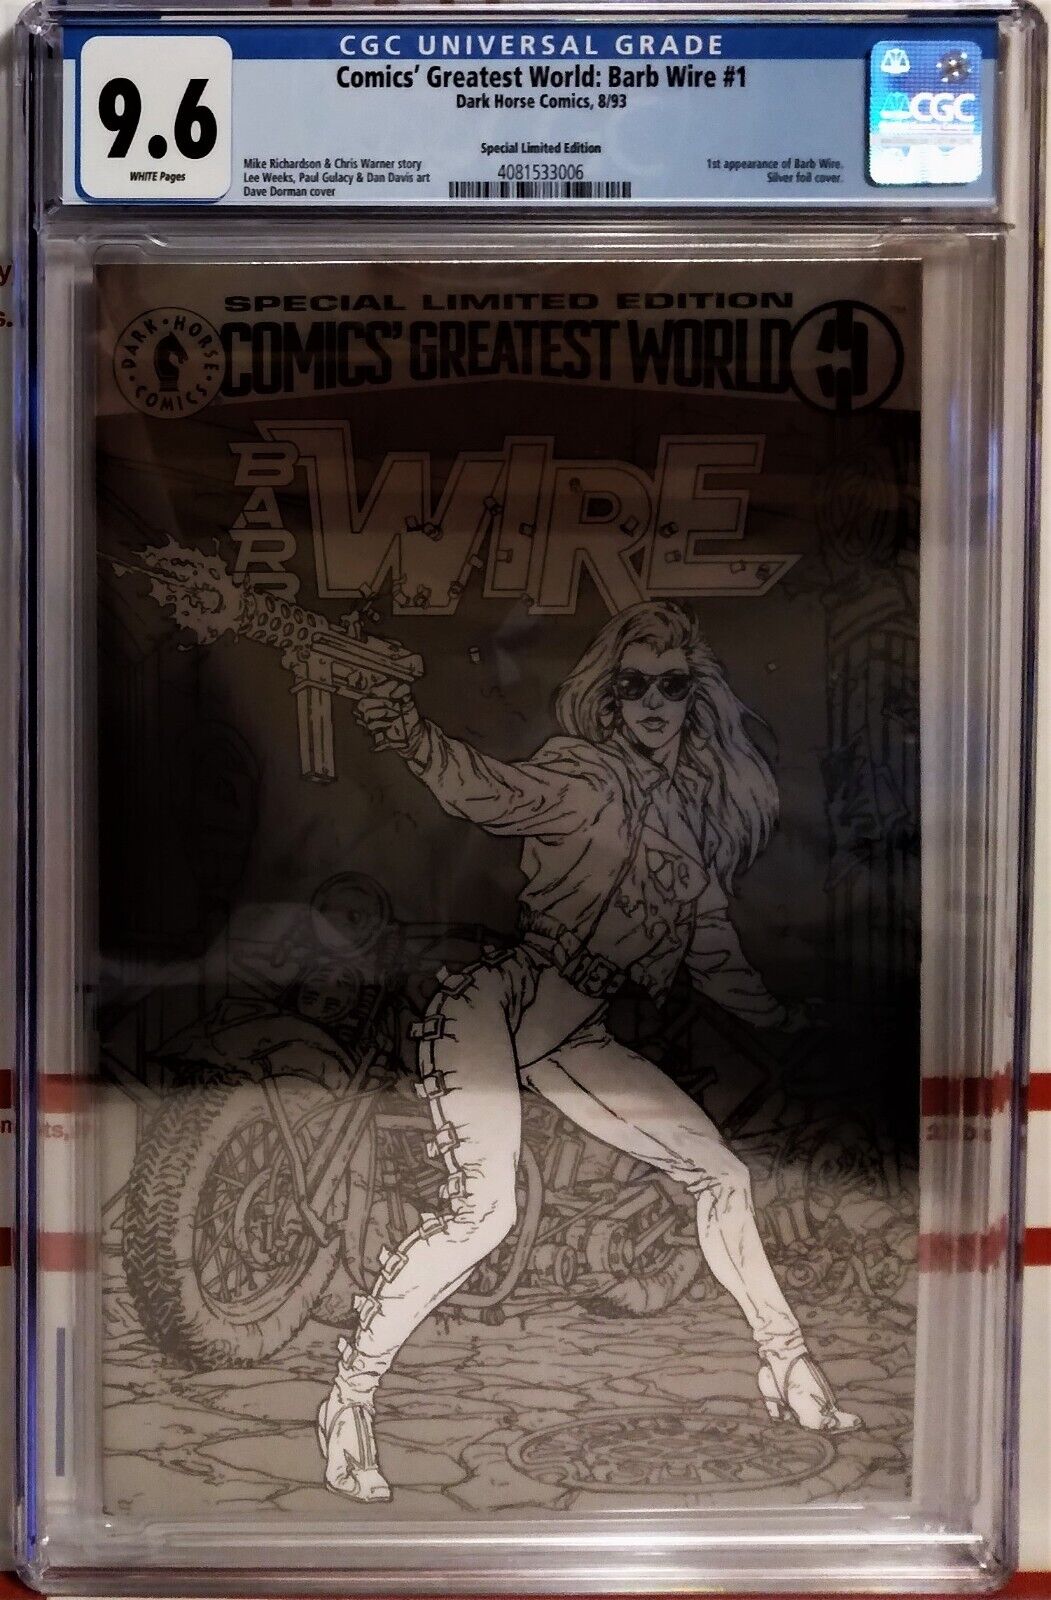 💥 CGC 9.6 NM+ COMICS GREATEST WORLD BARB WIRE #1 🔑 SPECIAL EDITION SILVER FOIL